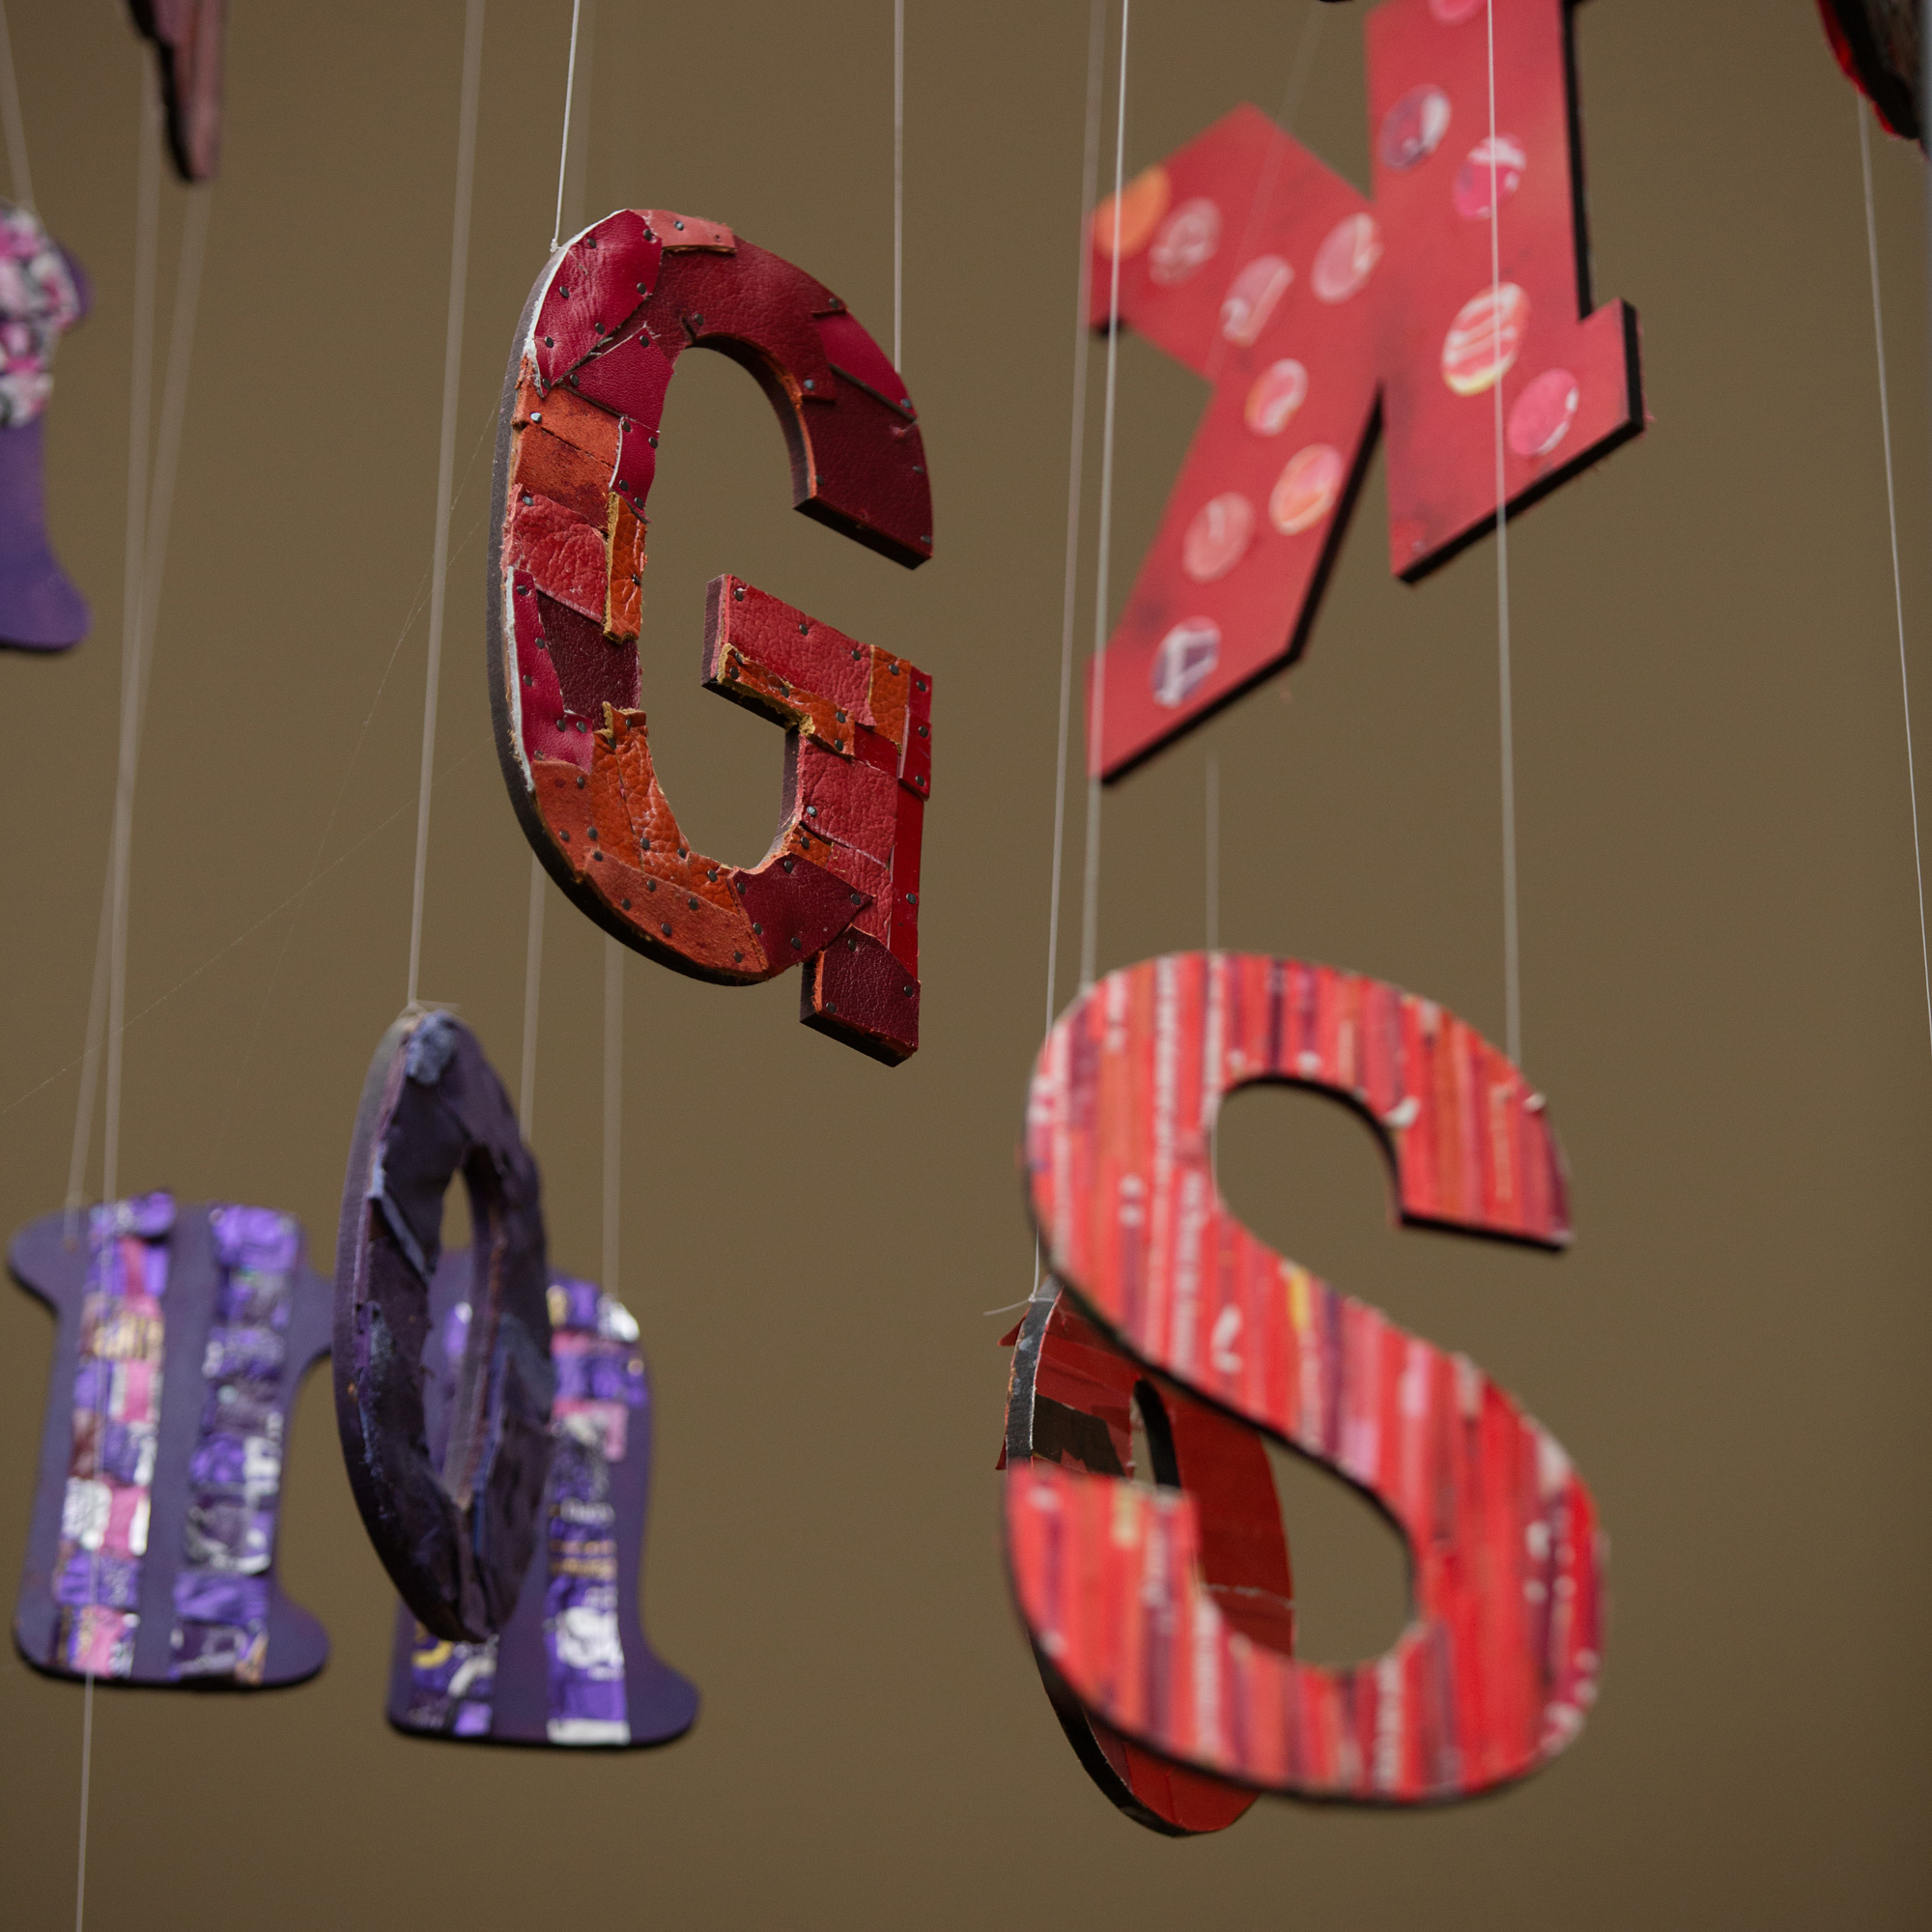 colourful letters dangle from art project